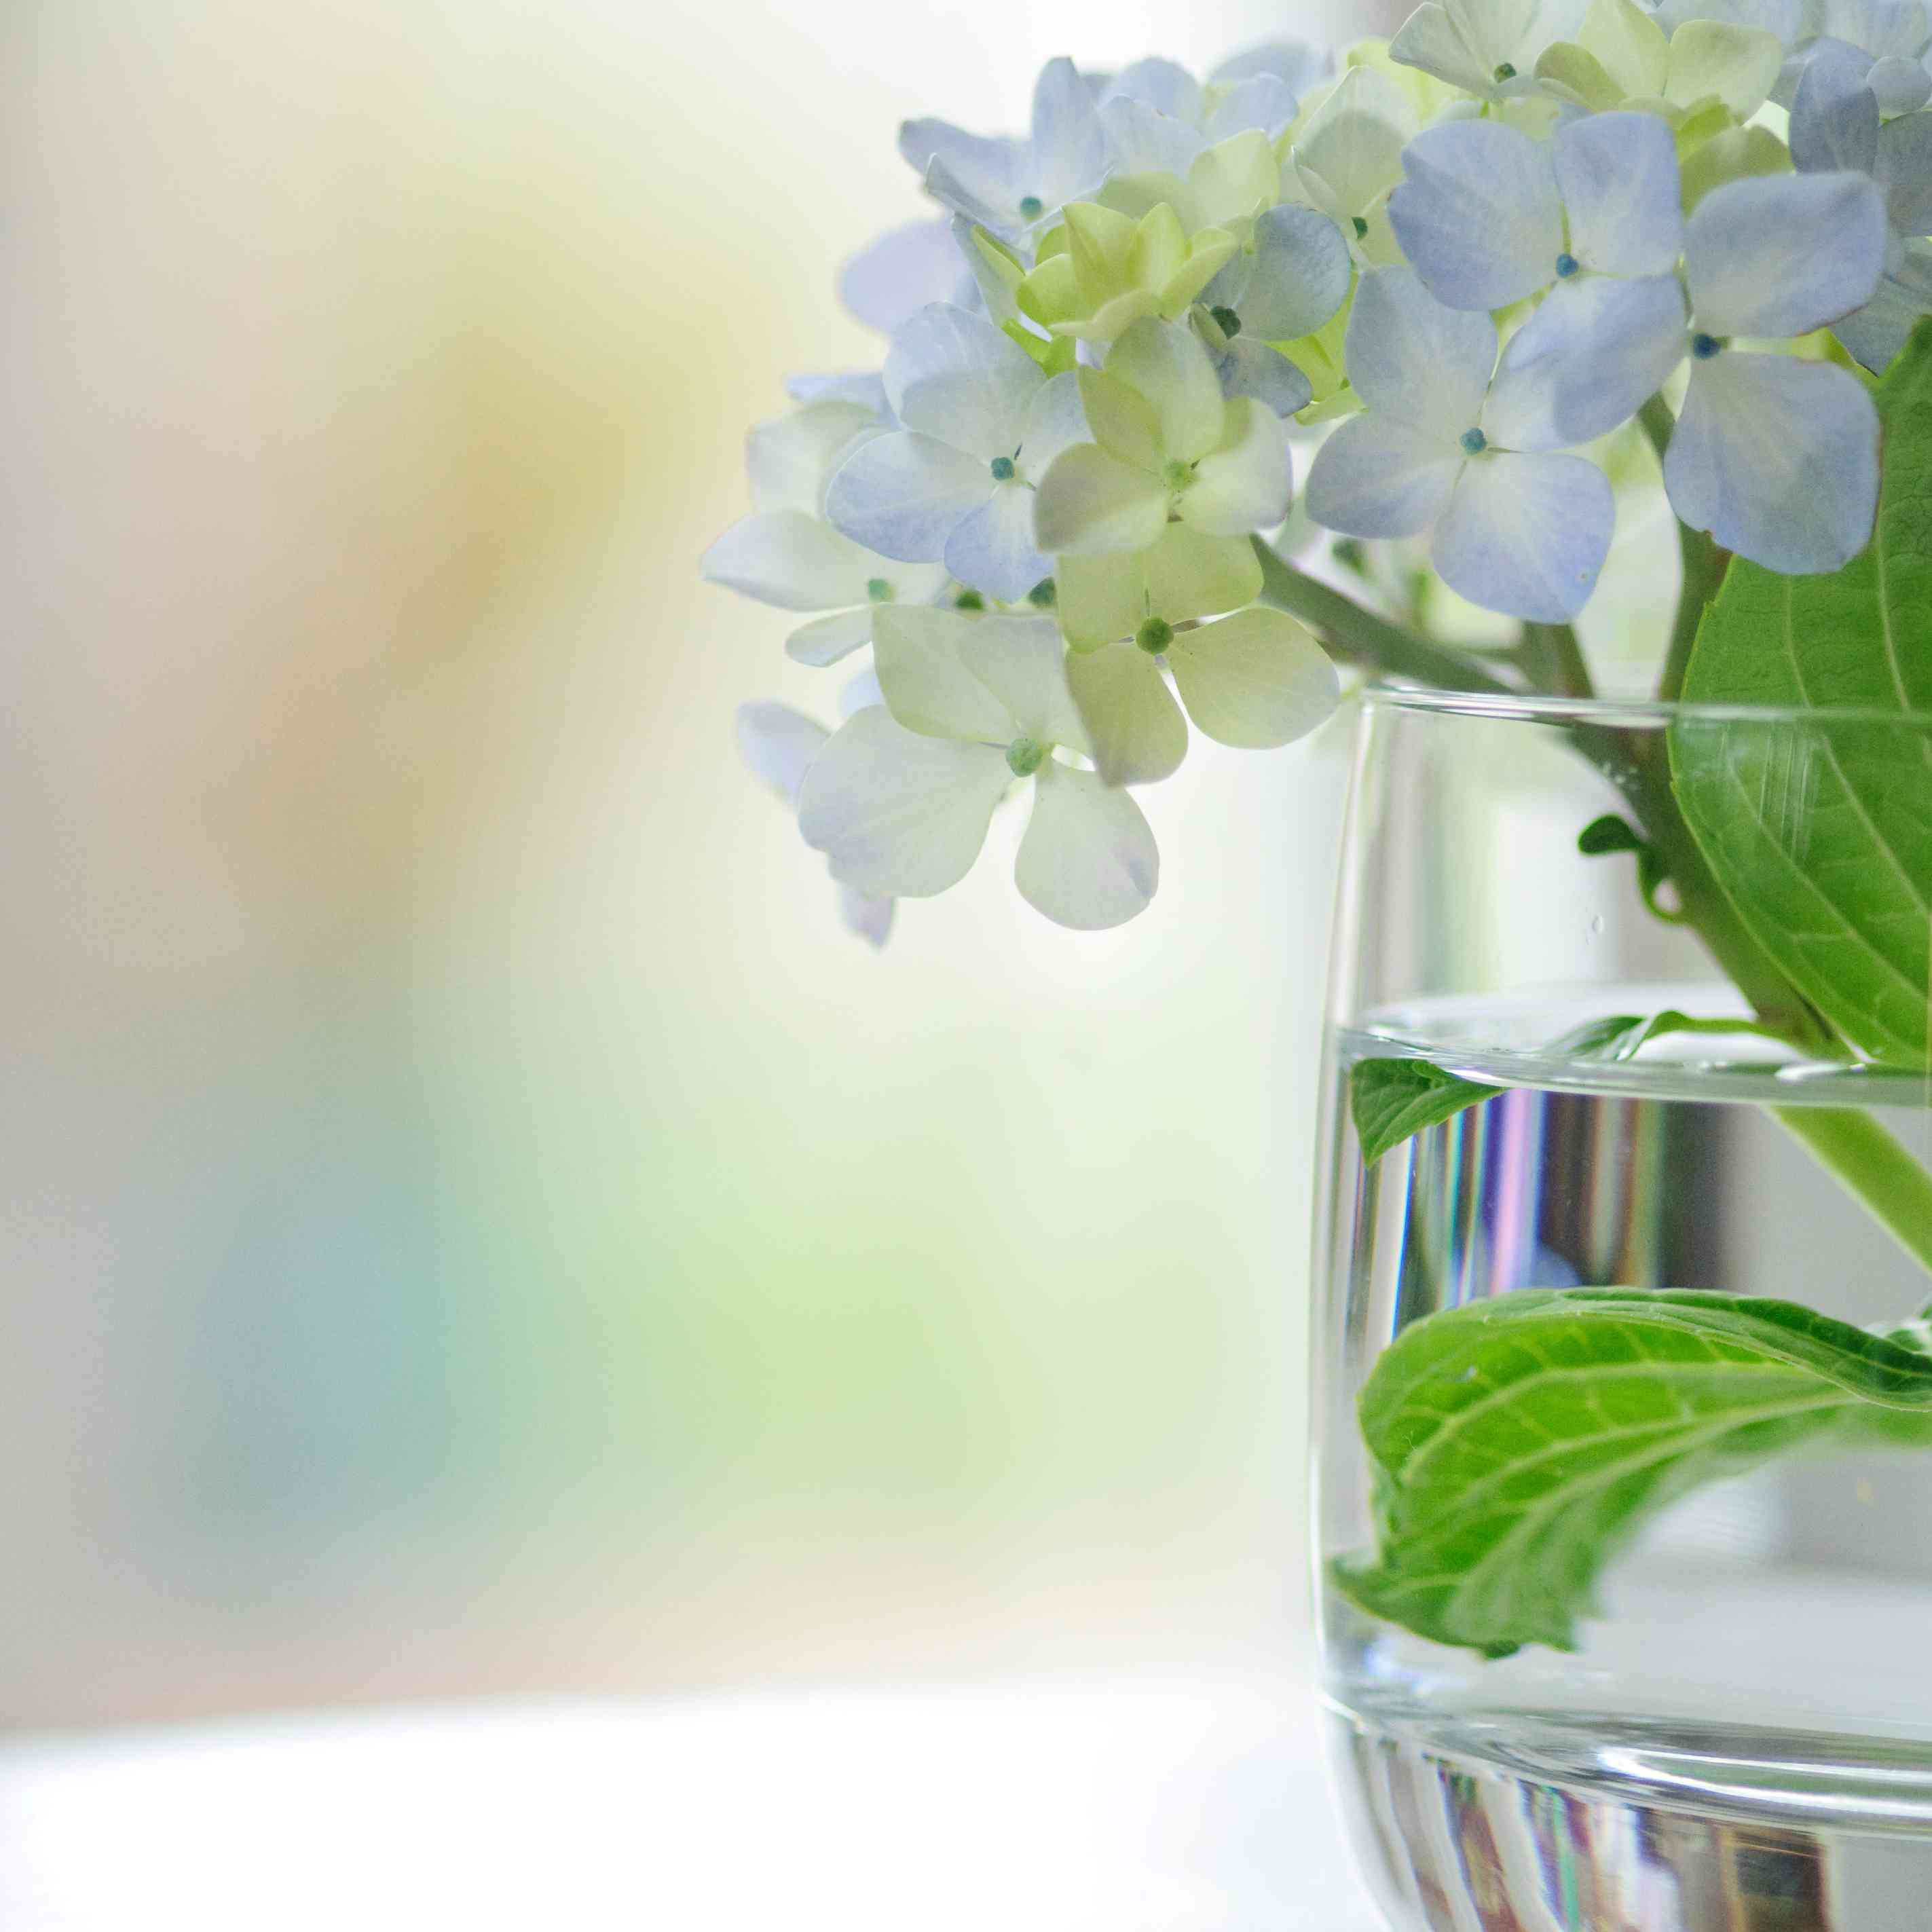 ice cream stick flower vase of how to dry and preserve hydrangea flowers for hydrangeas vase gettyimages 103956334 589b63945f9b58819c837e07